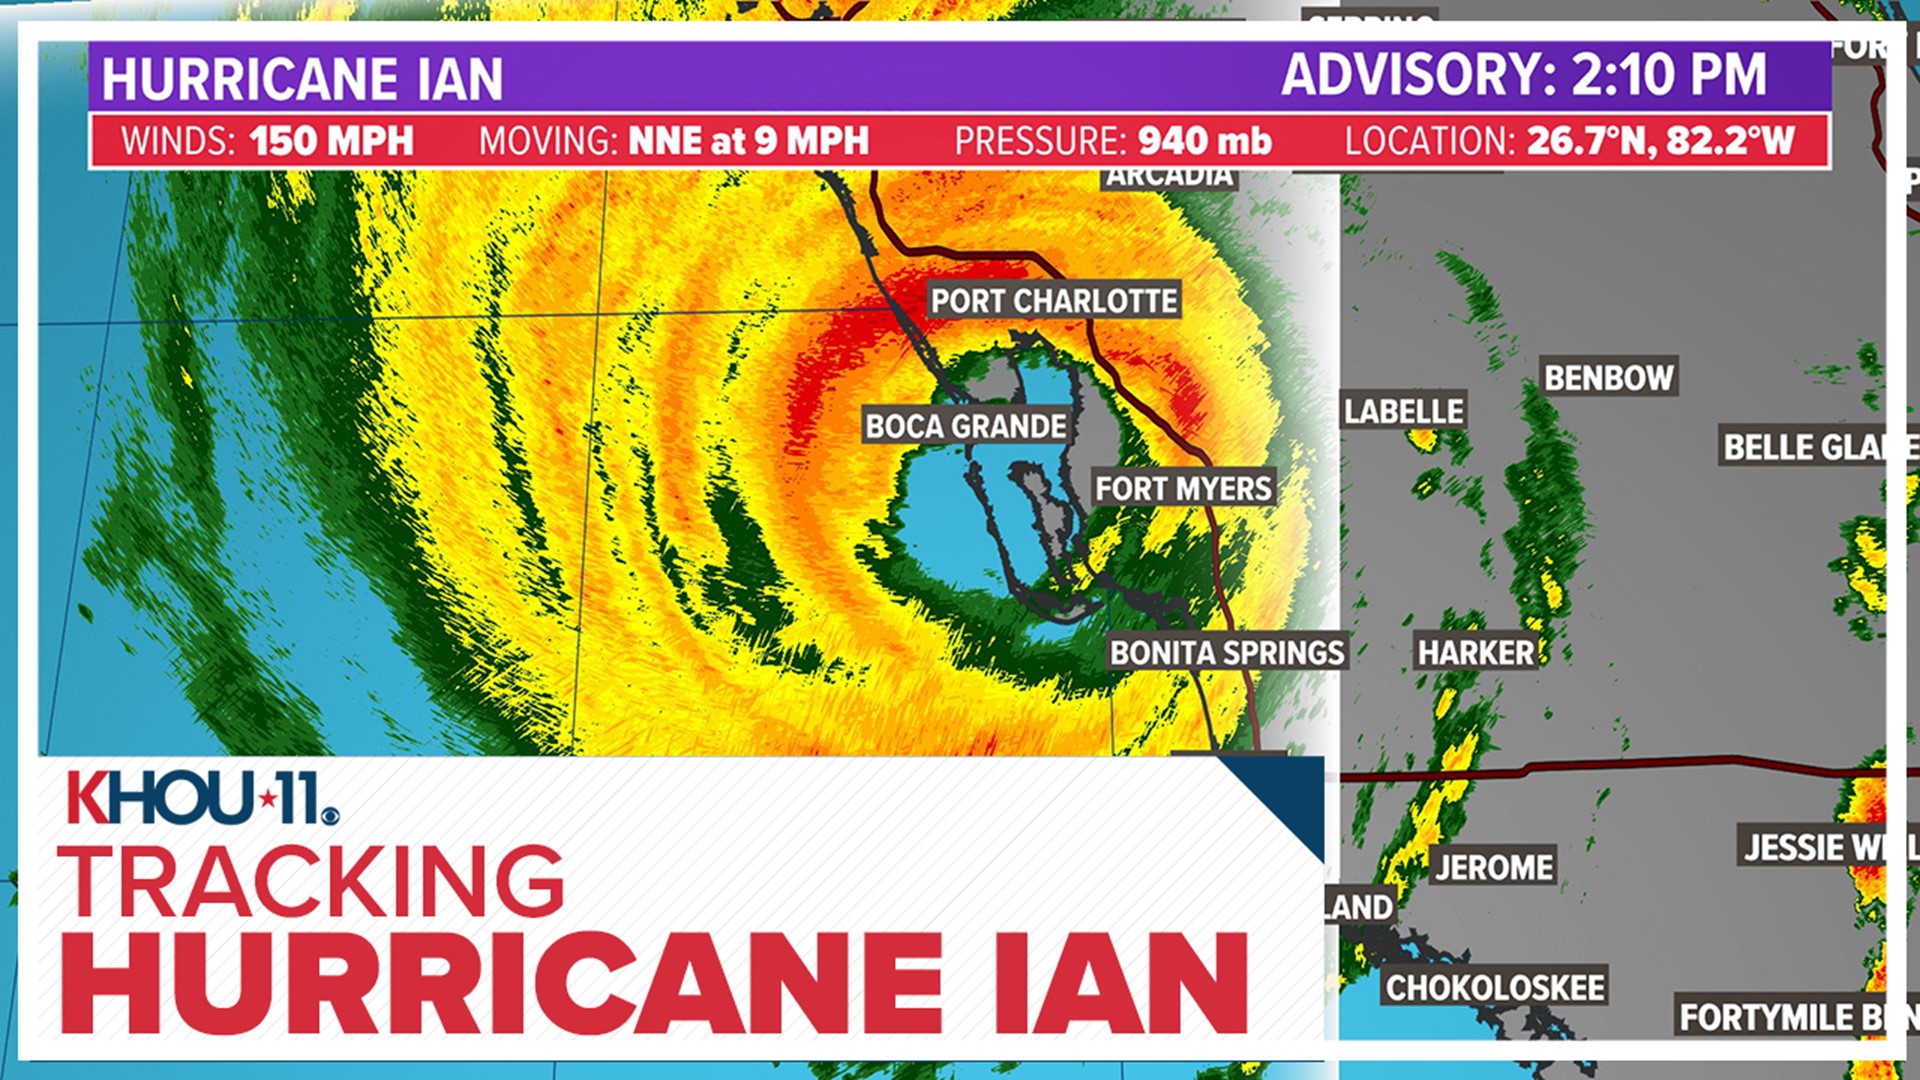 Hurricane Ian made landfall on Wednesday in southwest Florida as a large Category 4 storm.